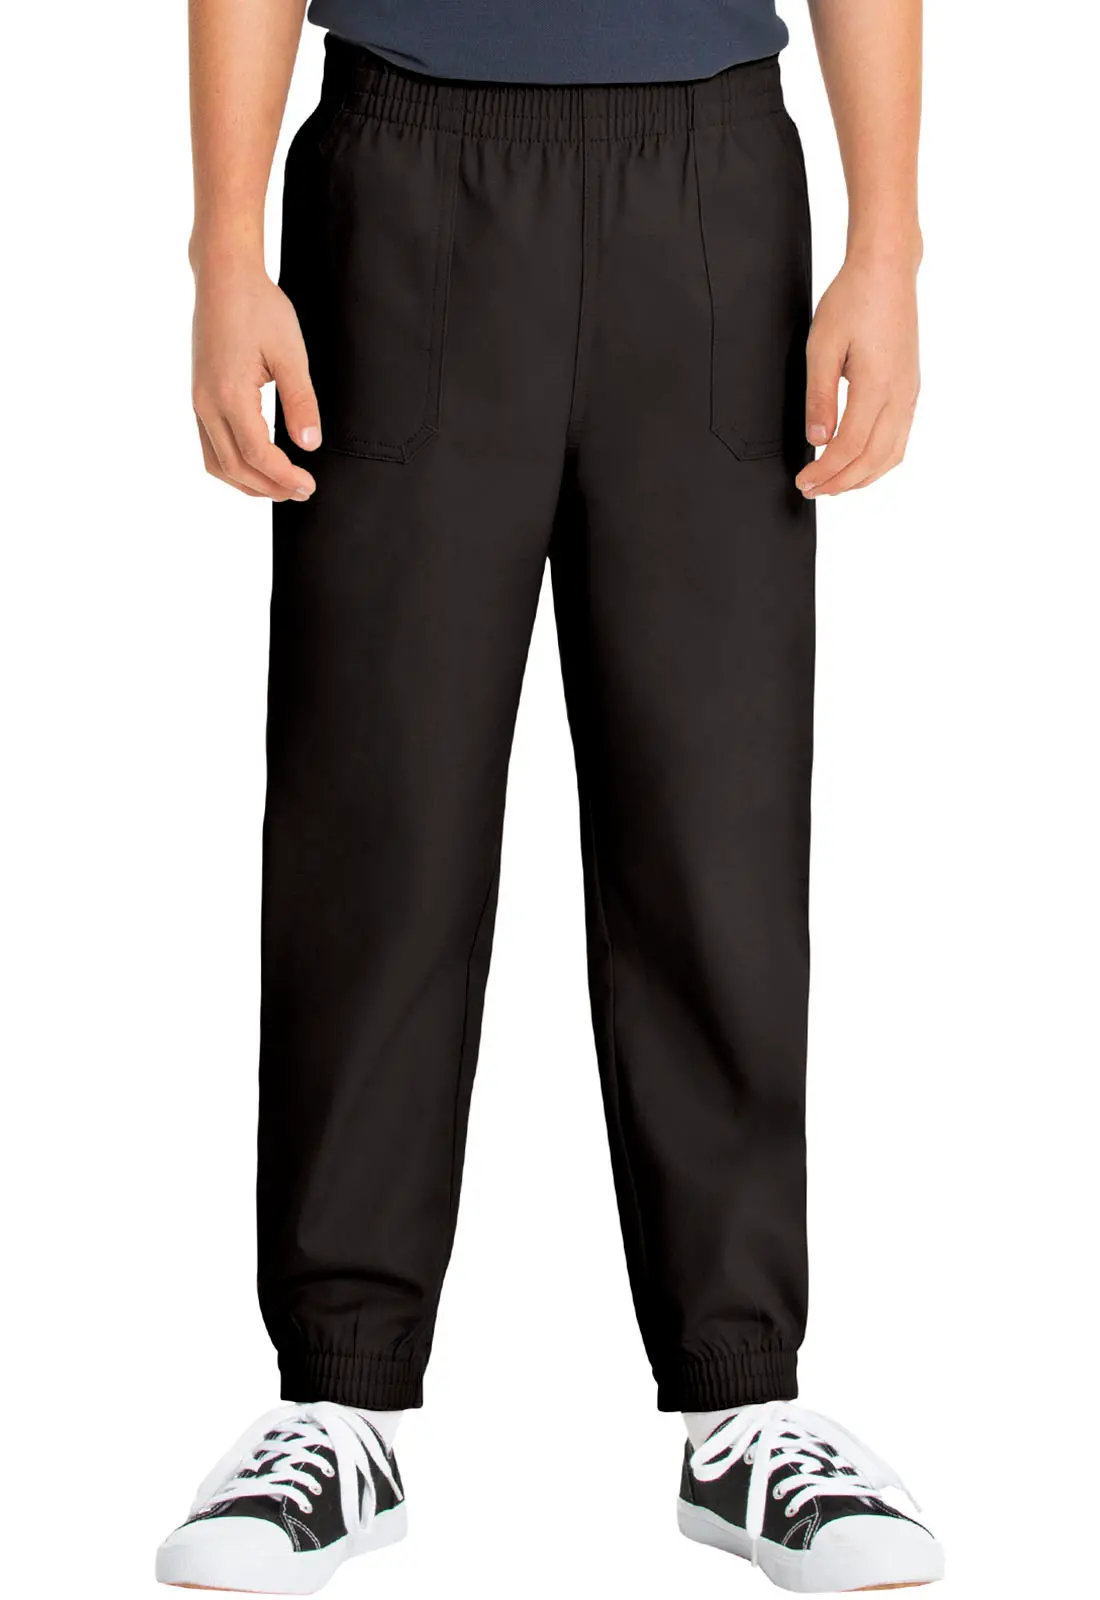 Real School Uniforms Real School Everybody Bottoms Everybody Pull-on Jogger Pant